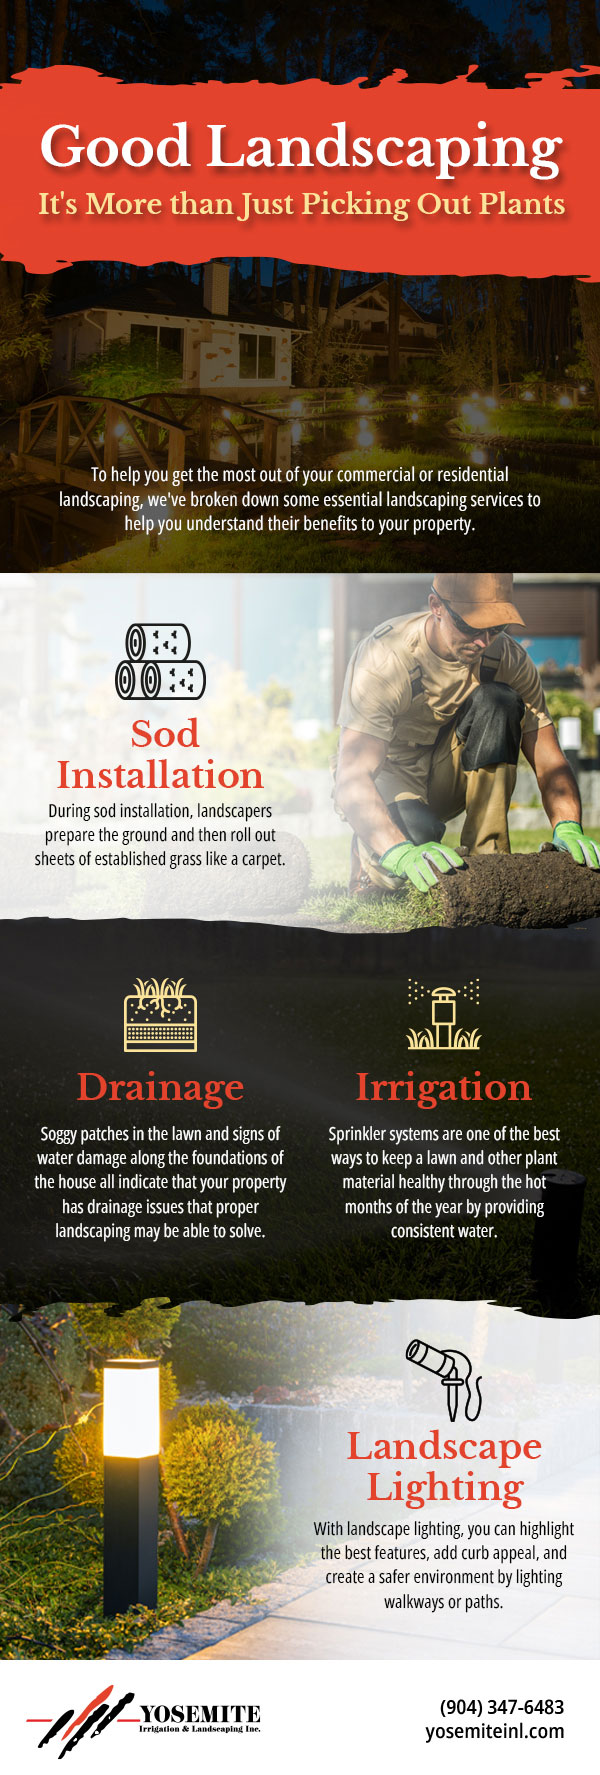 Key Components Your Landscaping Needs to Include